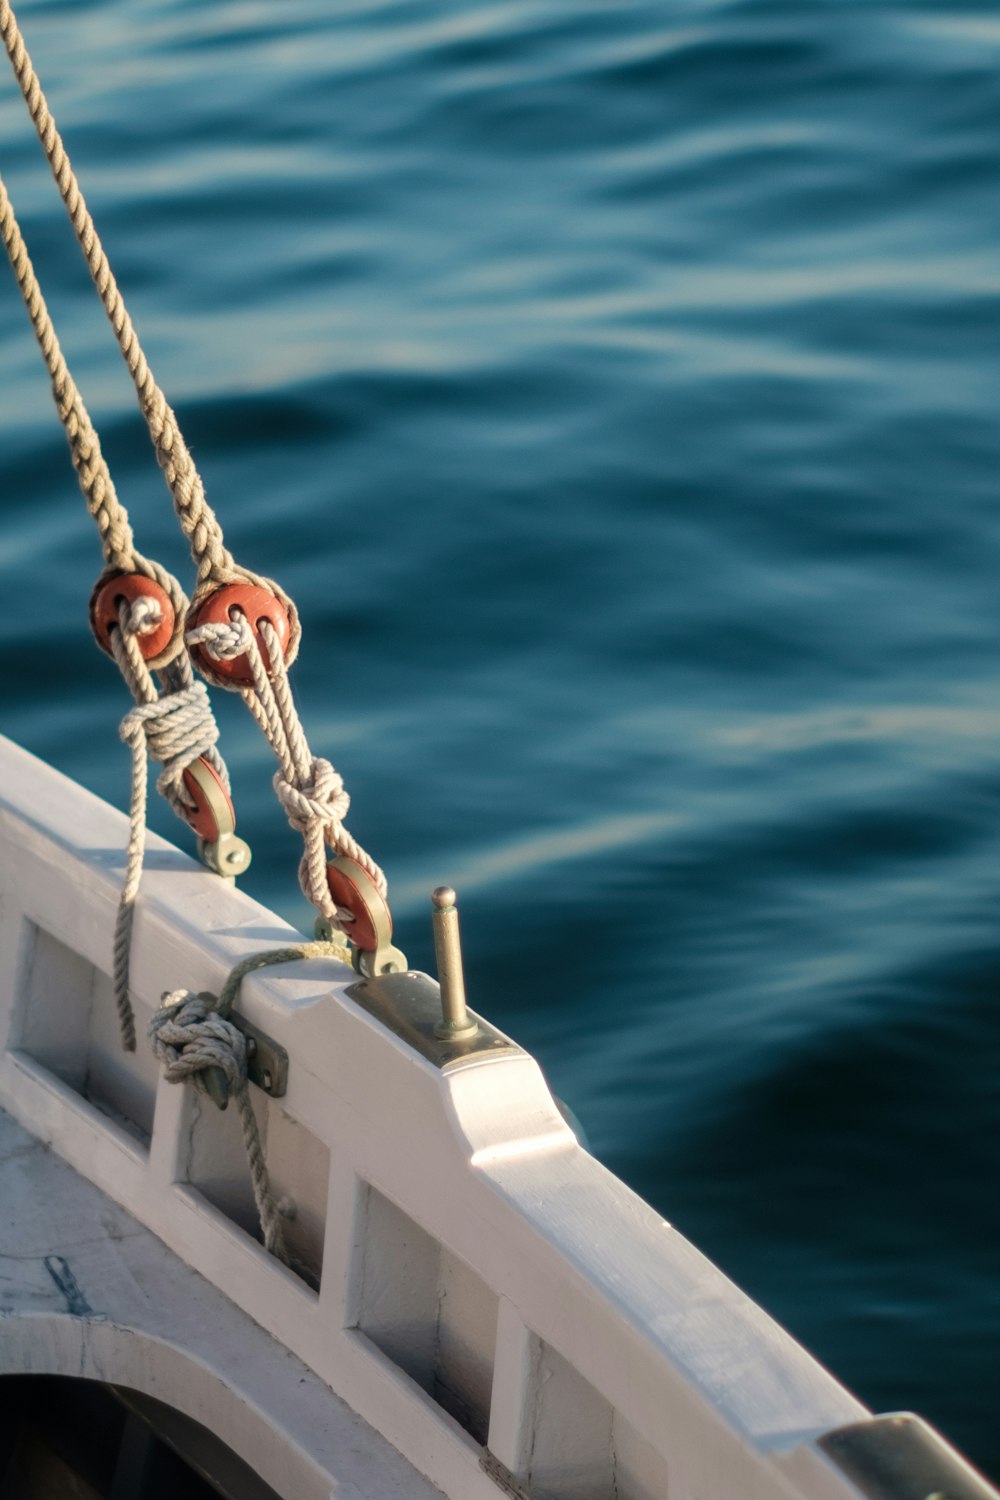 White and brown boat with rope photo – Free Boat Image on Unsplash